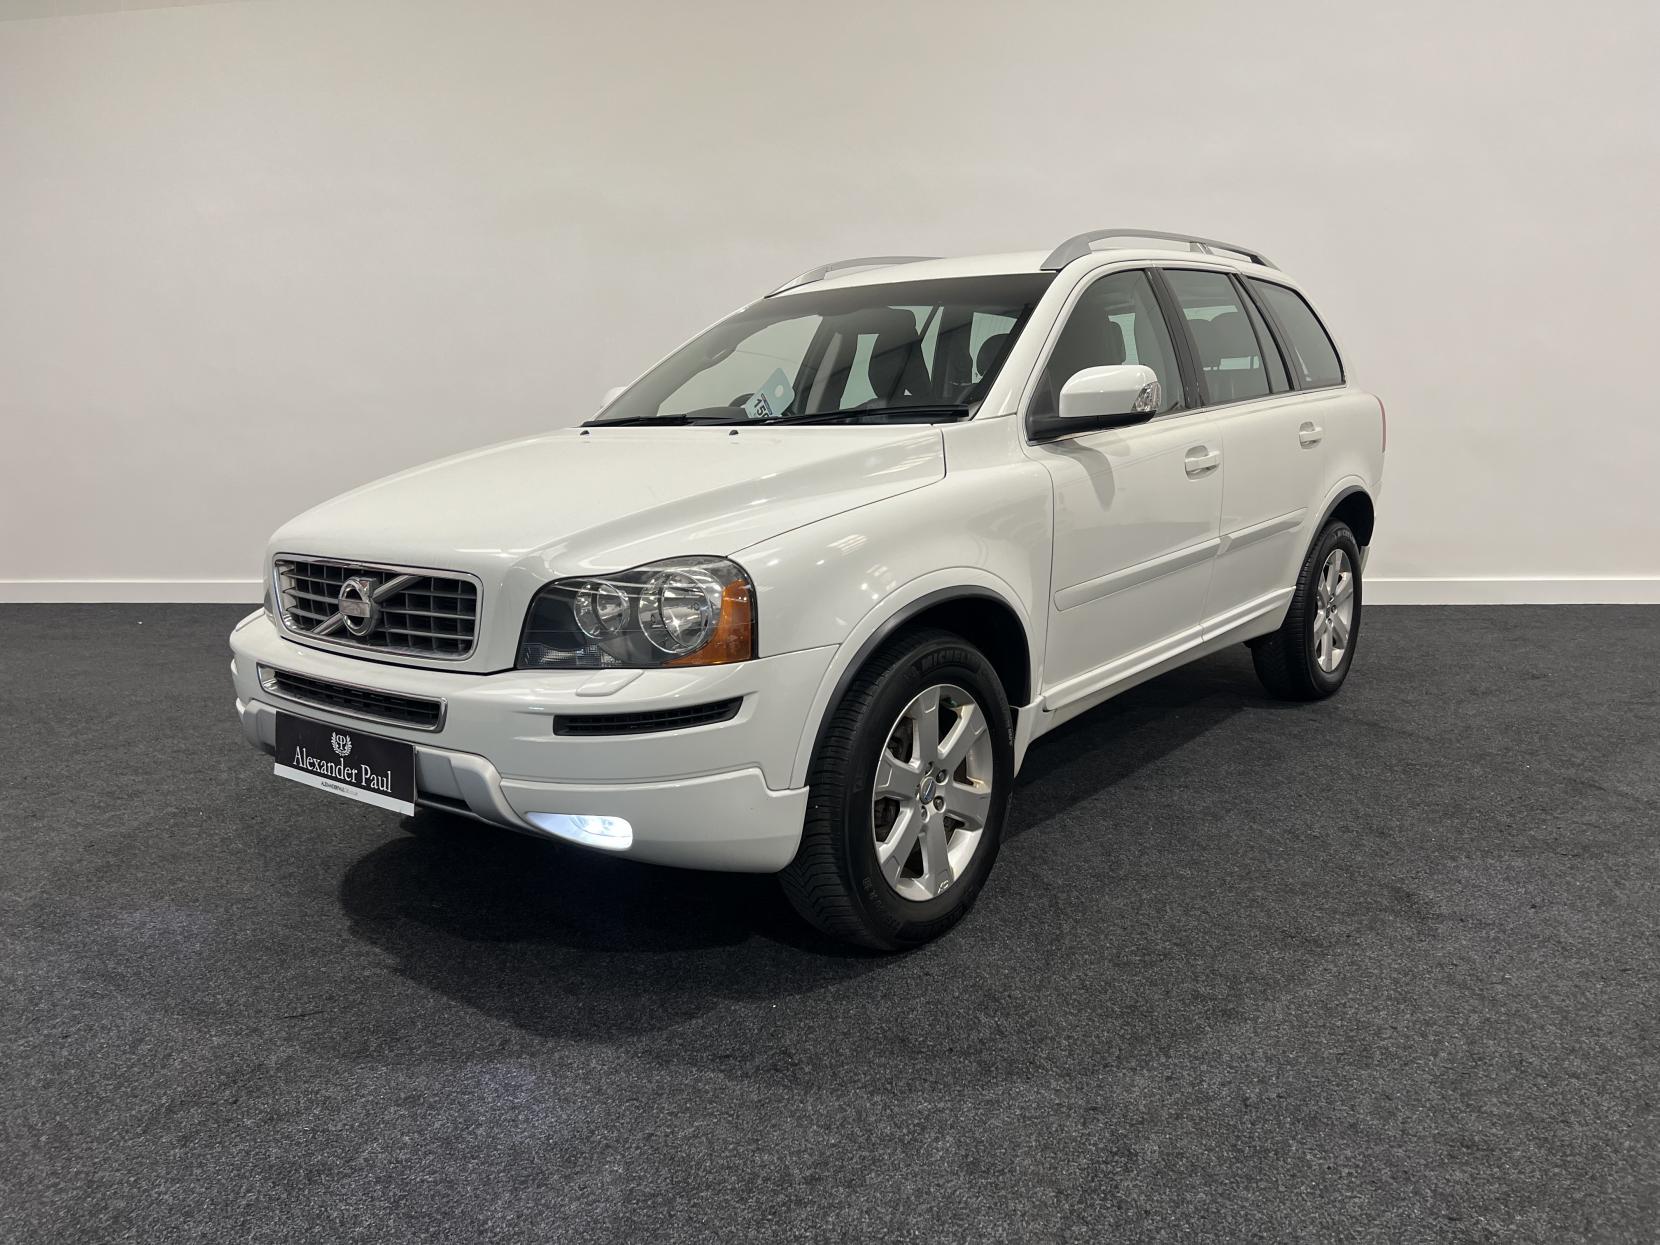 Volvo XC90 2.4 D5 SE SUV 5dr Diesel Geartronic 4WD Euro 5 (200 ps)